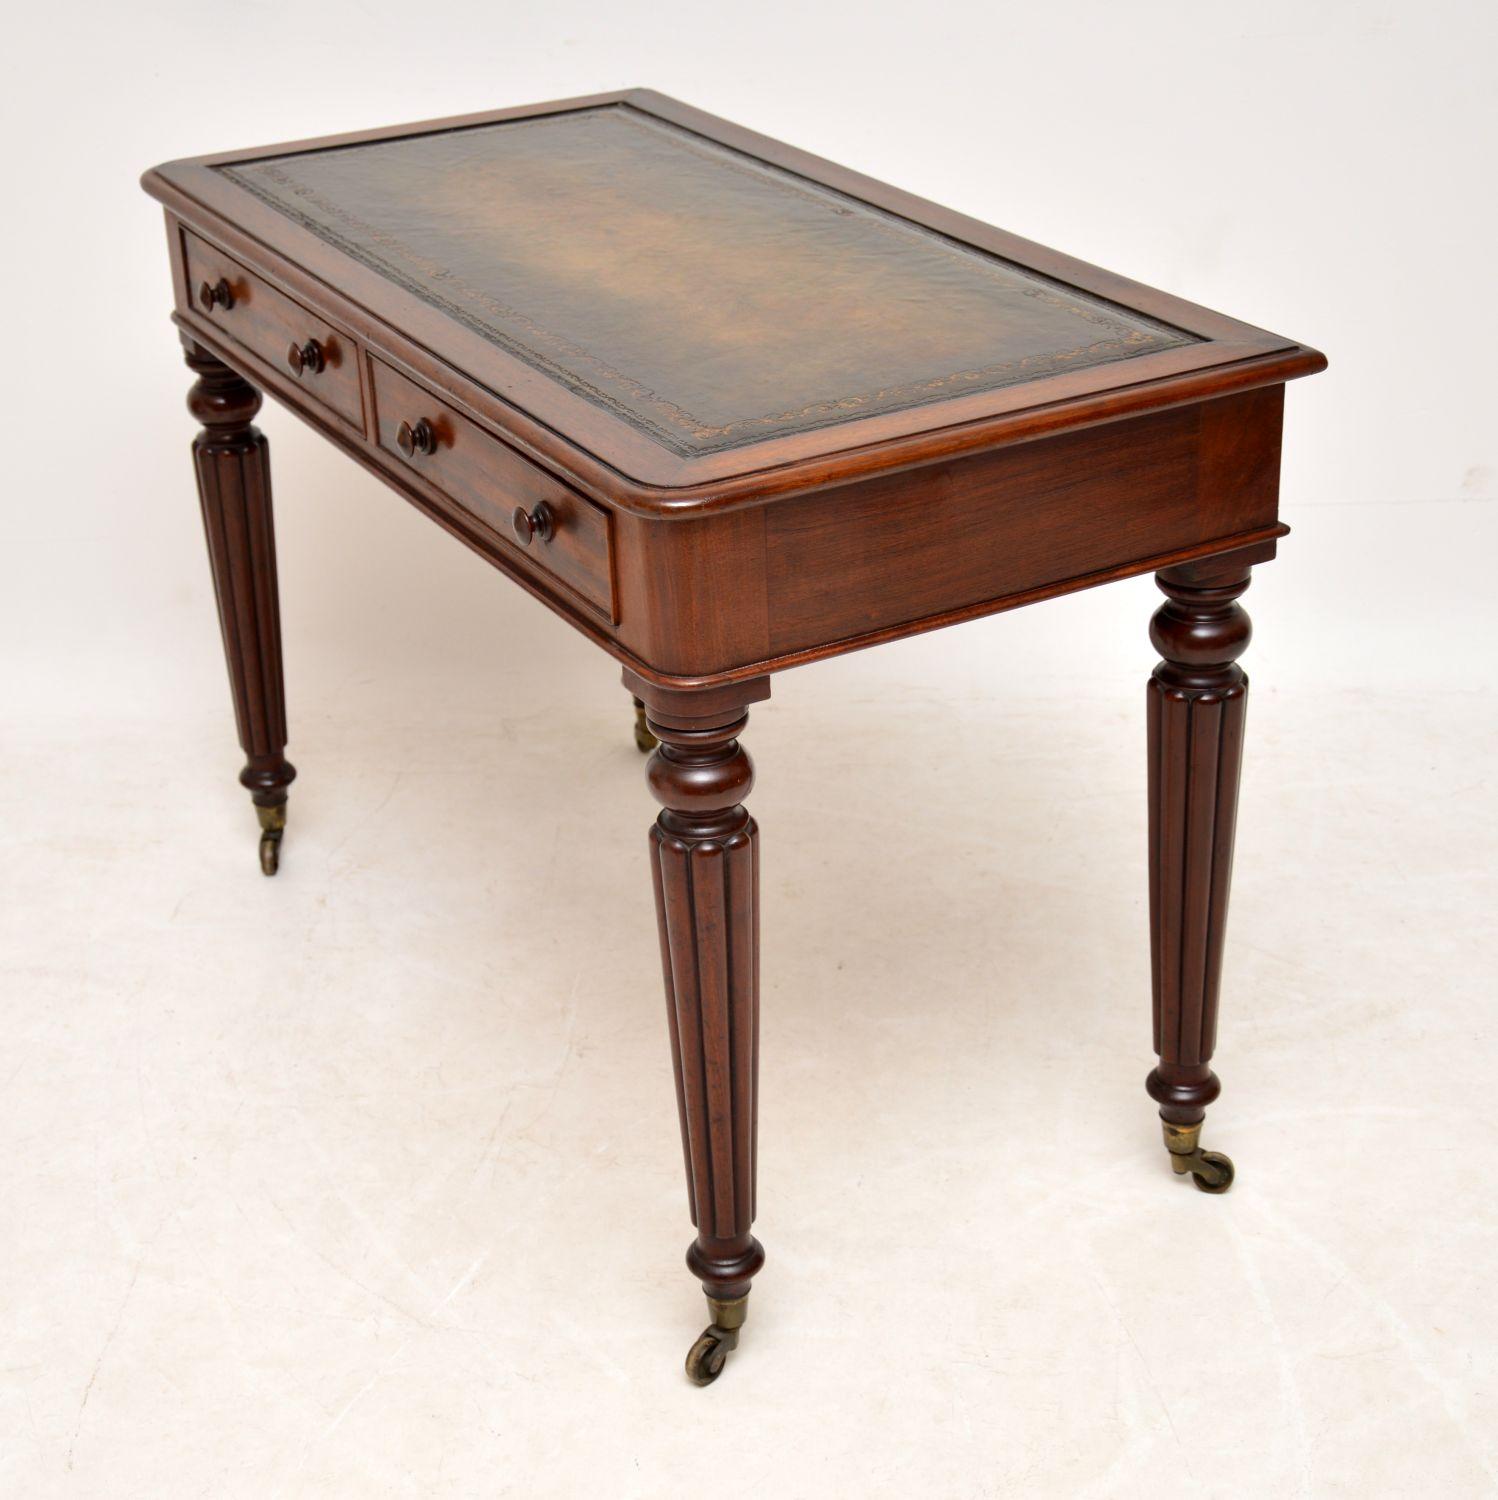 British Antique Victorian Mahogany Leather Top Writing Table